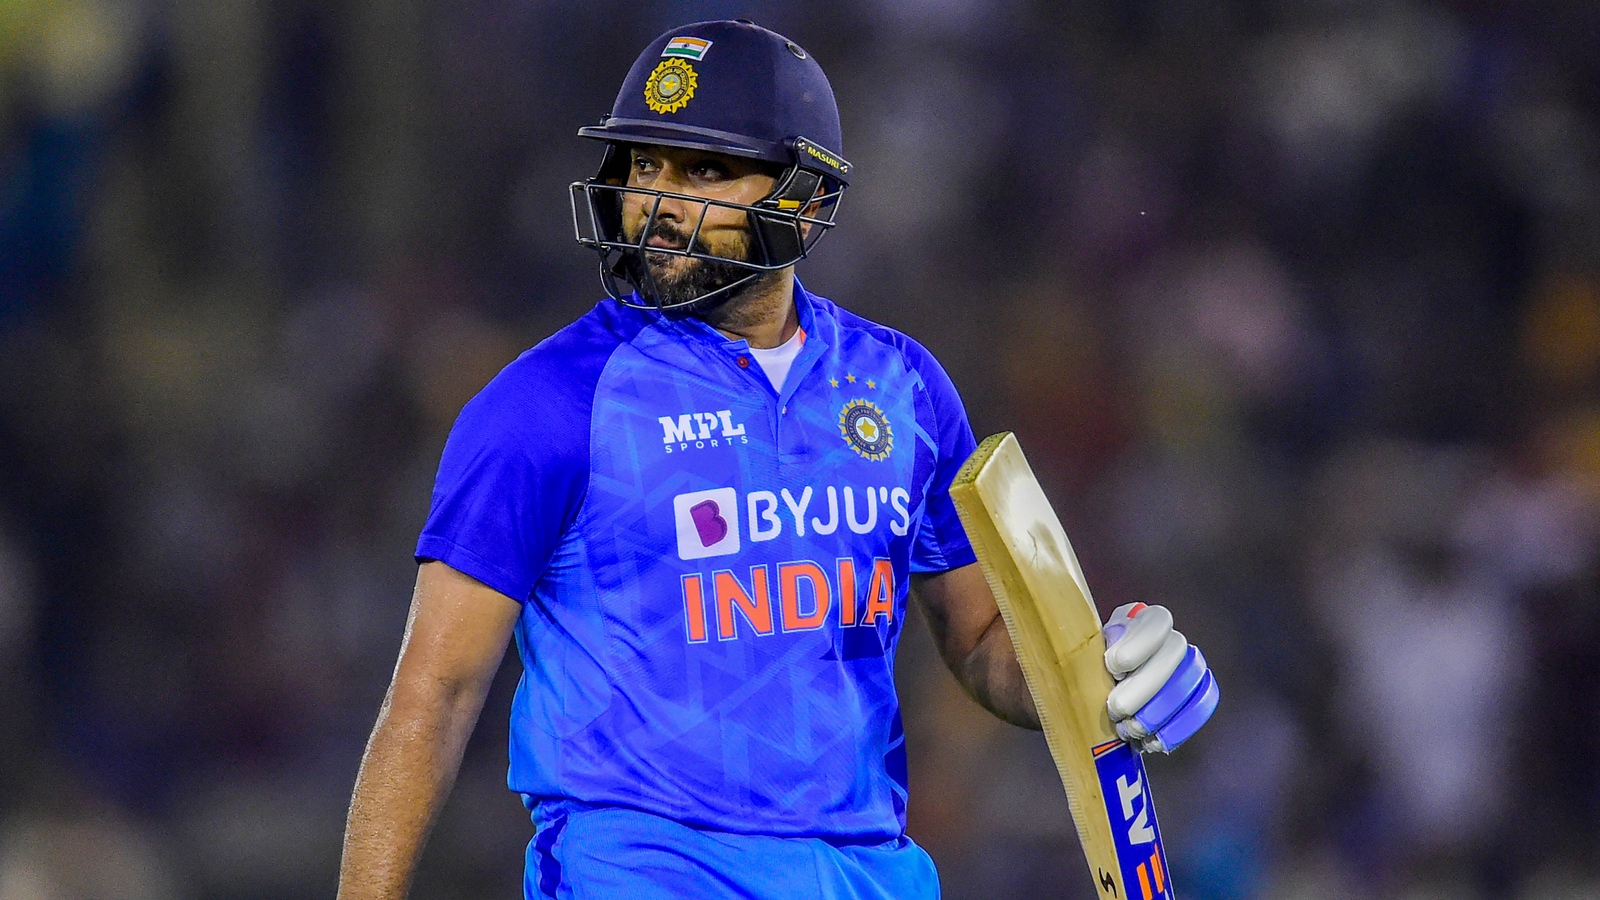 india-vs-pakistan-3-sensational-records-of-rohit-sharma-at-icc-t20-world-cup